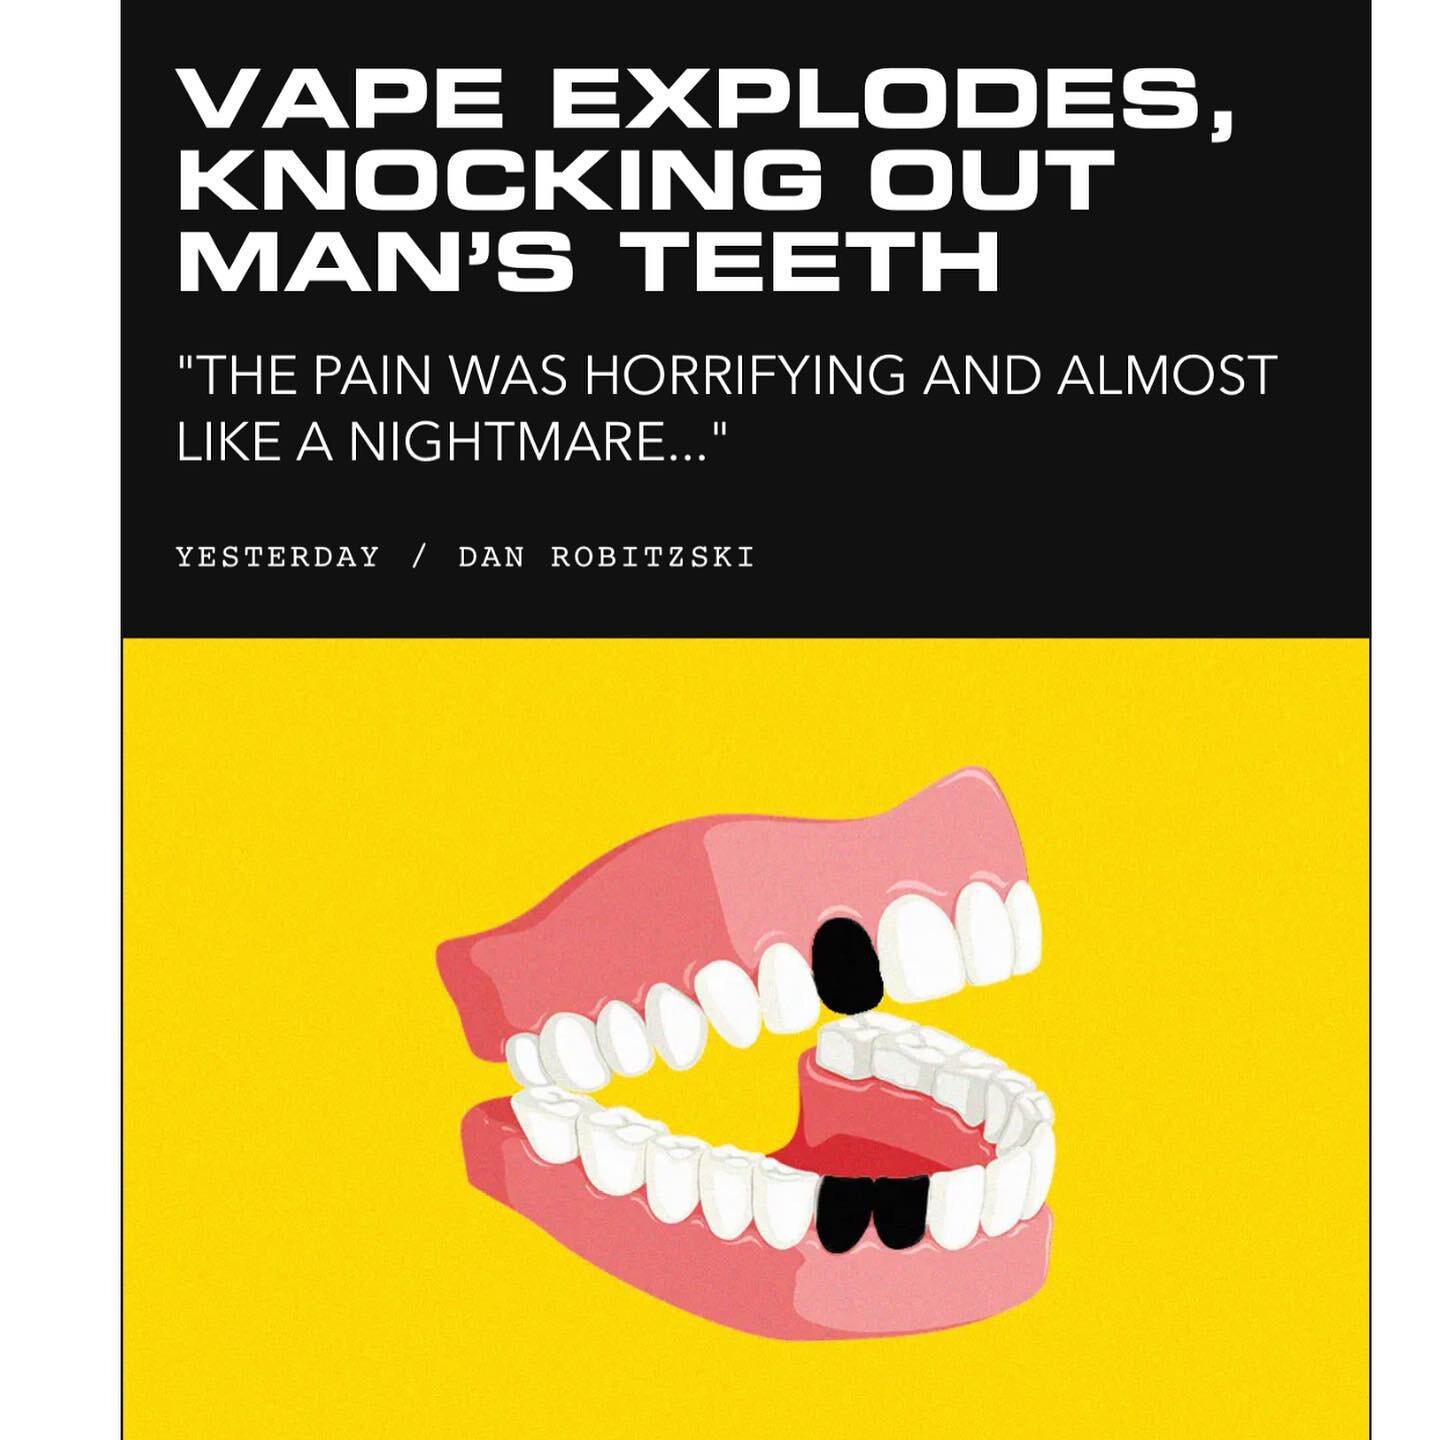 Warning! E-cigarettes are dangerous in many ways&hellip; They are unregulated by FDA and can affect much more than just your lungs. https://futurism.com/neoscope/vape-explodes-knocking-out-mans-teeth #novape #vapesaretrash #fda